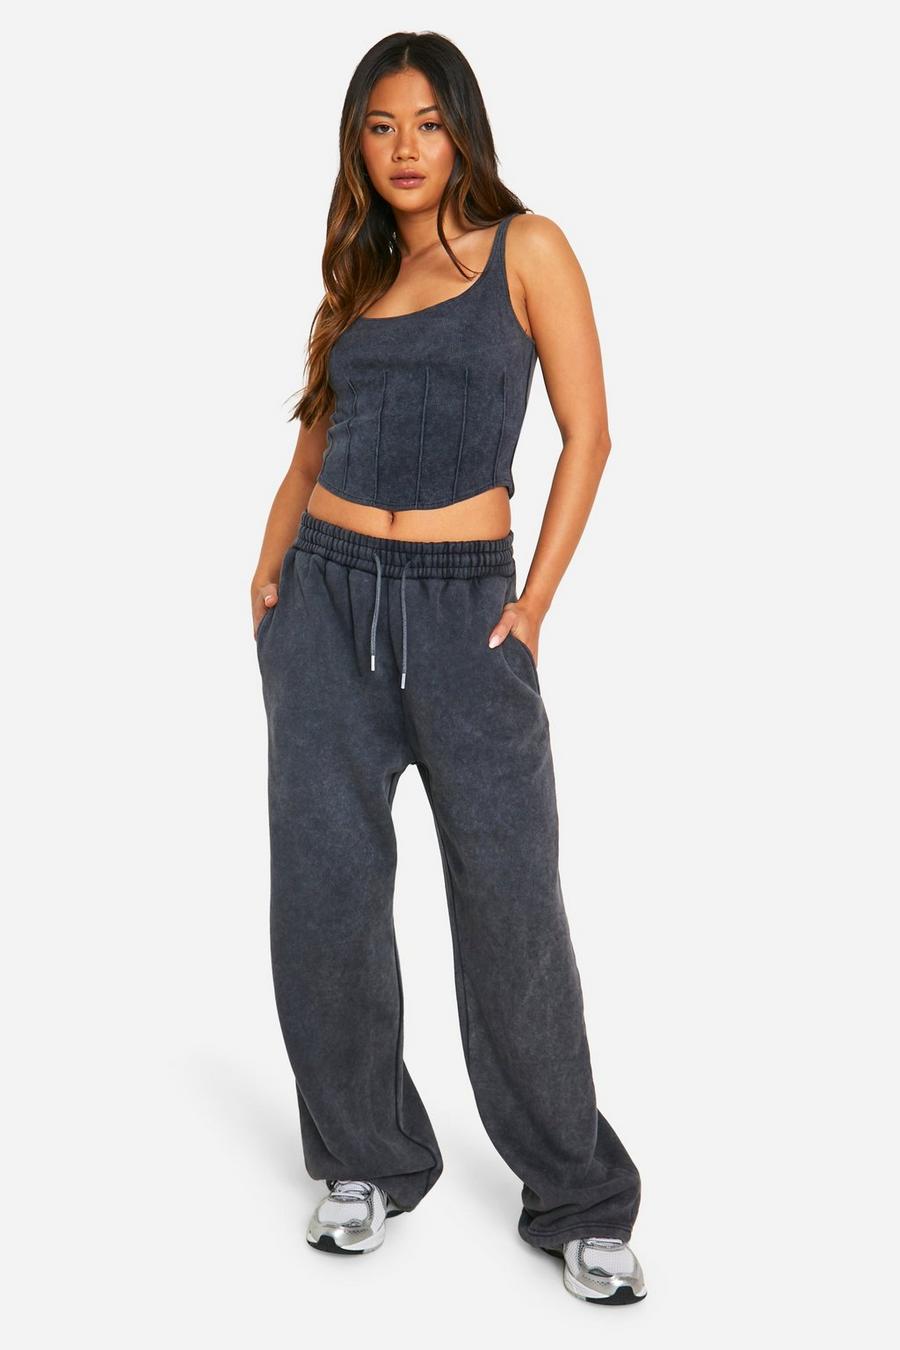 Charcoal Washed Seam Detail Corset Top And Straight Leg Sweatpant Set image number 1